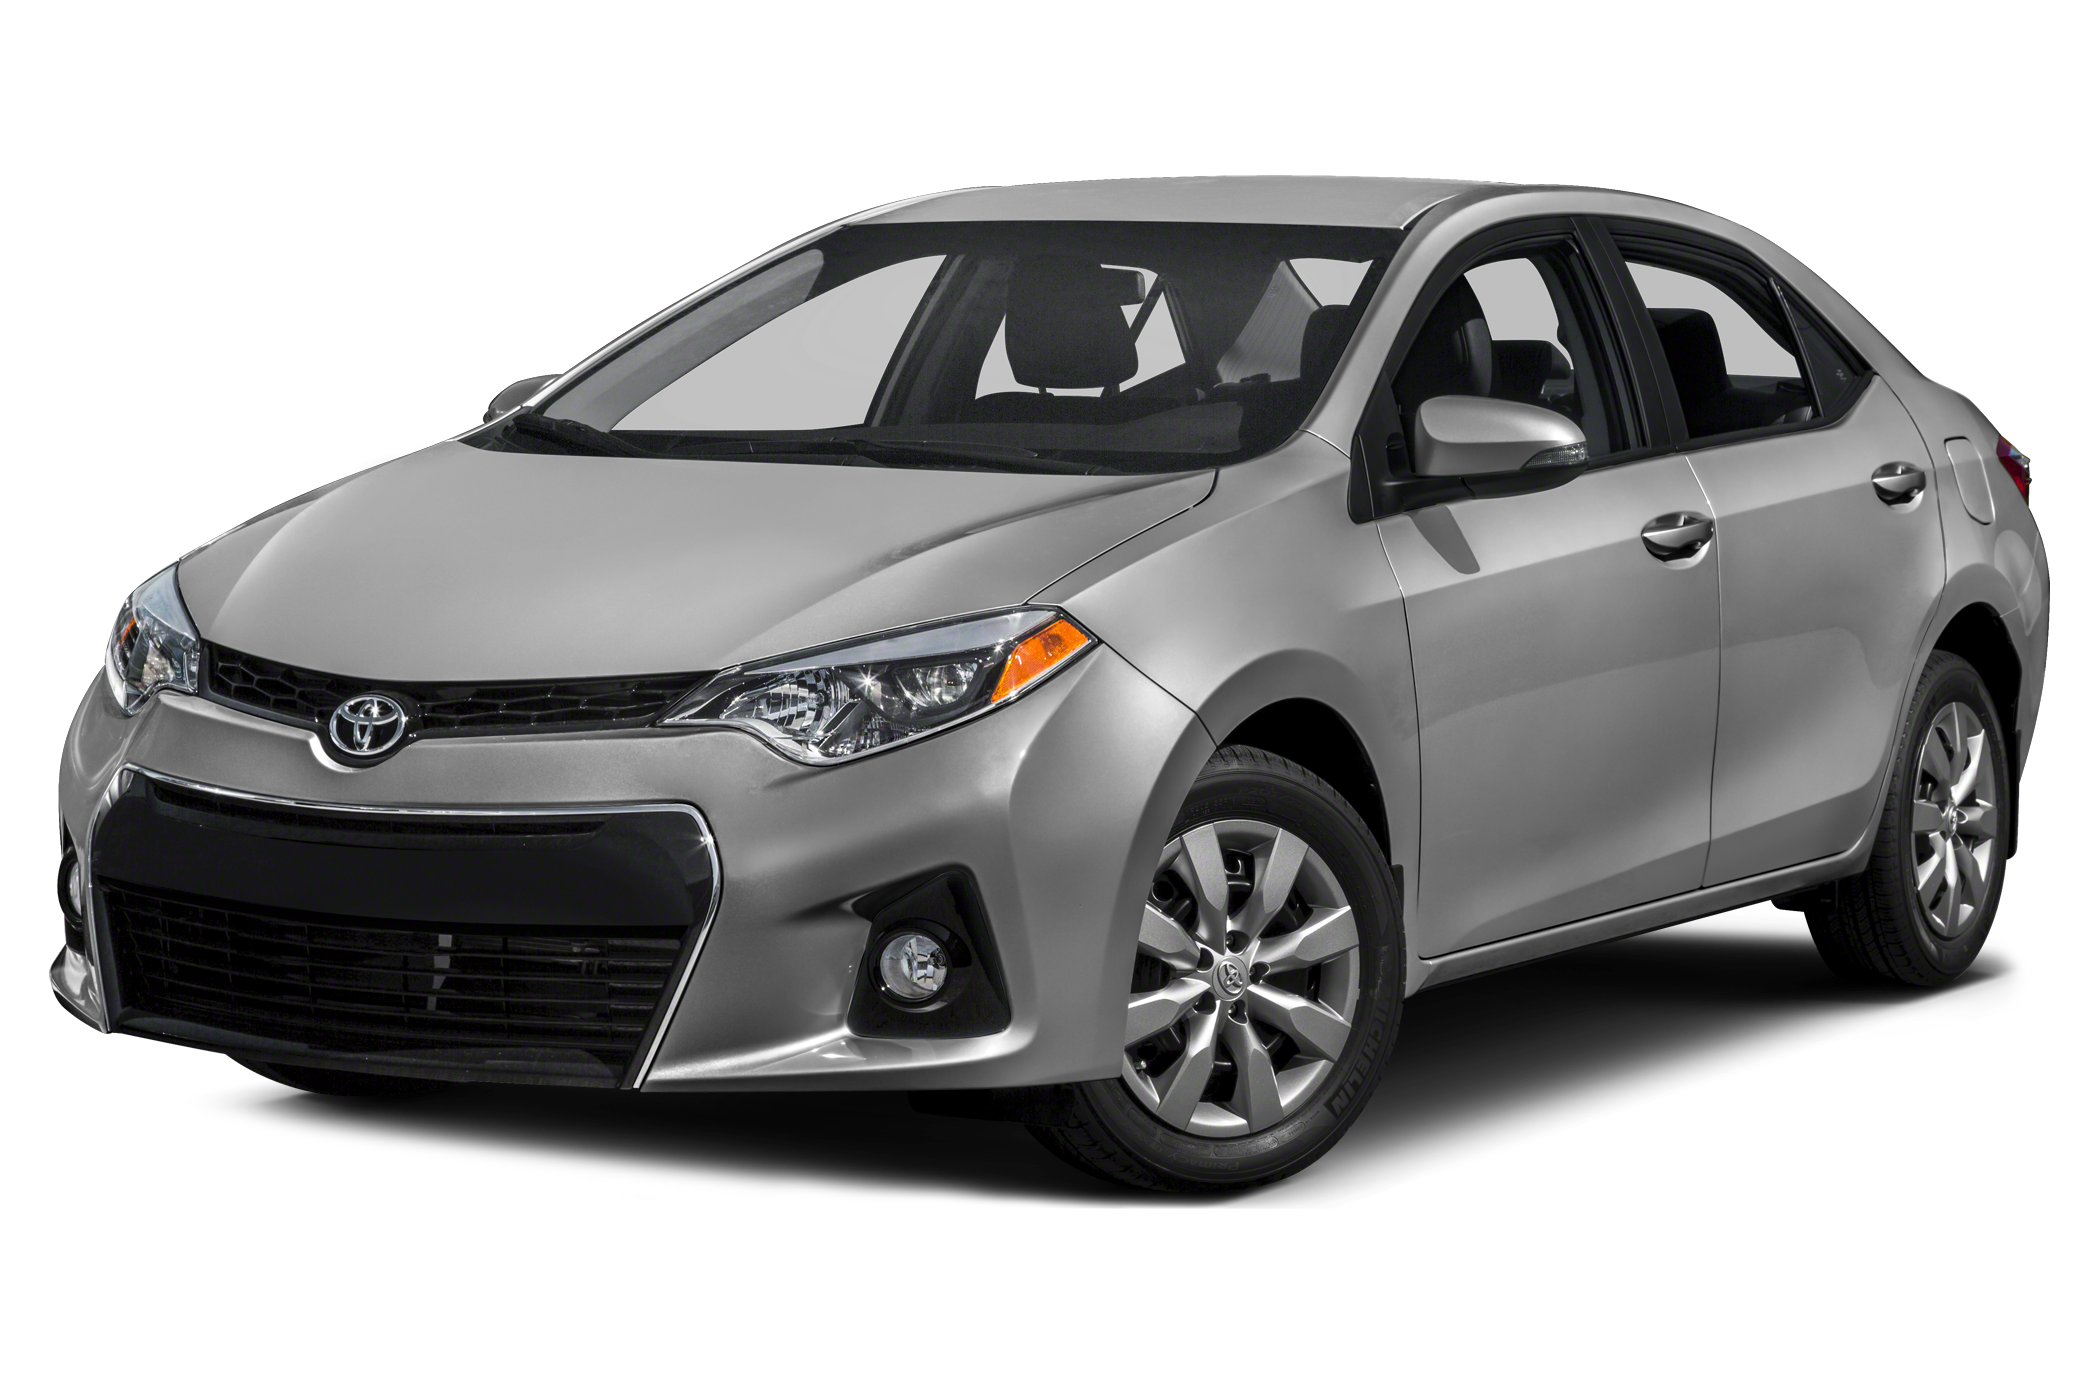 2016 Toyota Corolla Reviews Insights and Specs  CARFAX